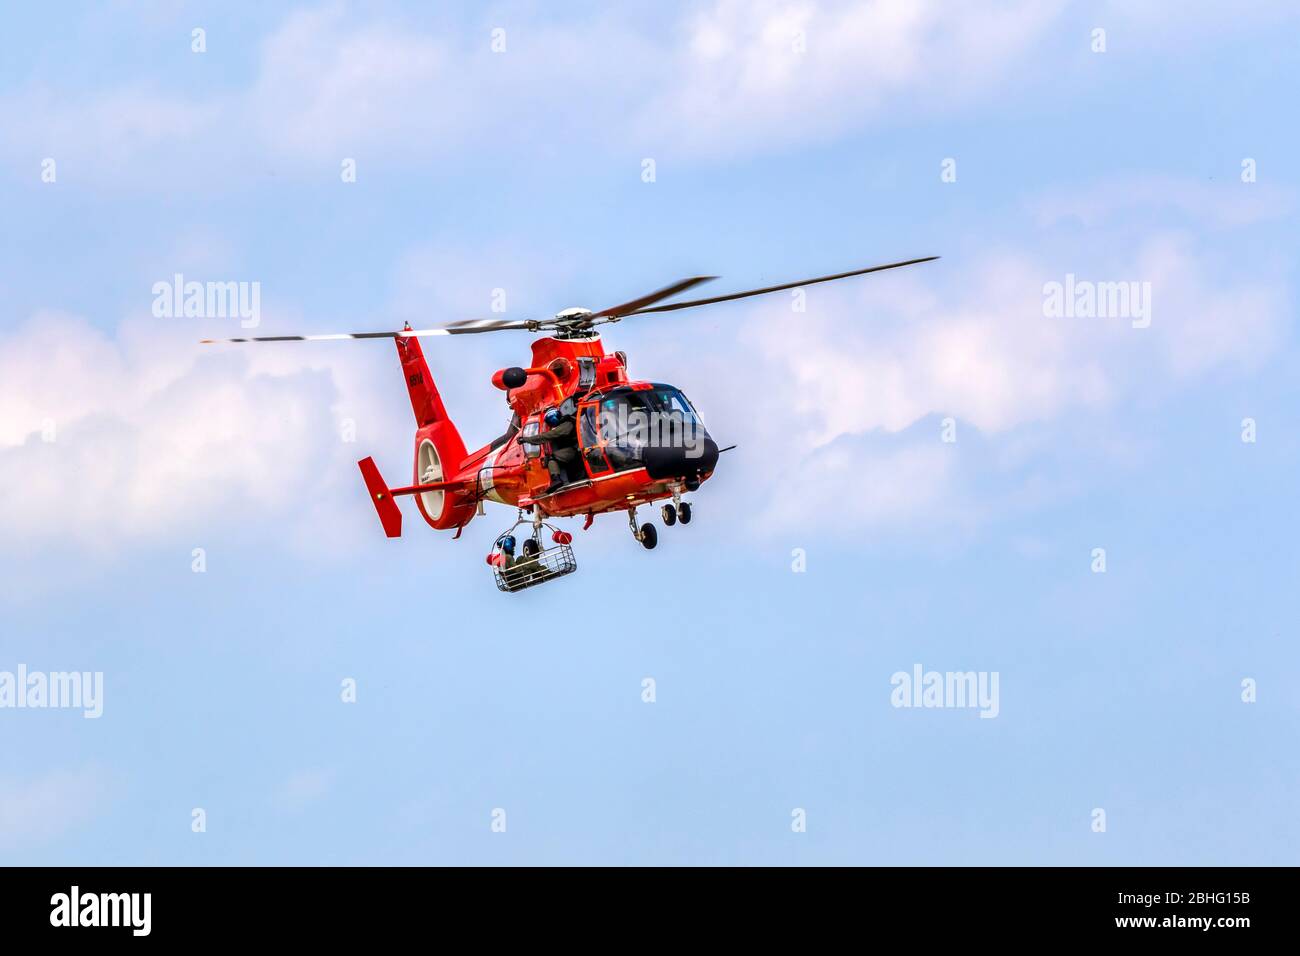 US Coast Guard MH-65 Dolphin Helicopter search and rescue demonstration at 2019 Wings Over Houston airshow, Houston, Texas. Stock Photo